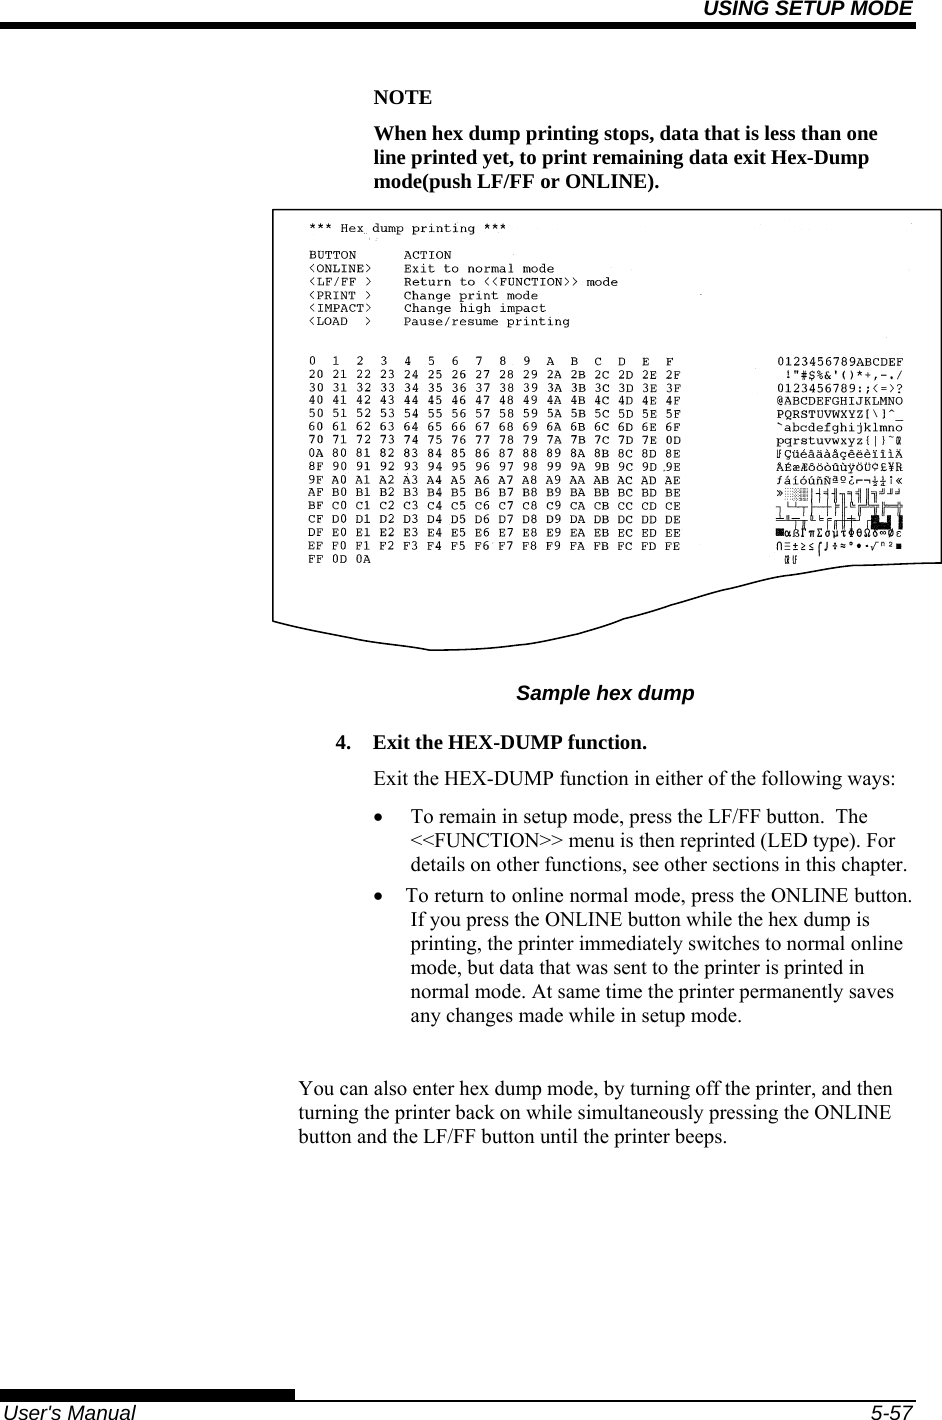 USING SETUP MODE   User&apos;s Manual  5-57 NOTE When hex dump printing stops, data that is less than one line printed yet, to print remaining data exit Hex-Dump mode(push LF/FF or ONLINE).    Sample hex dump 4.  Exit the HEX-DUMP function. Exit the HEX-DUMP function in either of the following ways: •  To remain in setup mode, press the LF/FF button.  The &lt;&lt;FUNCTION&gt;&gt; menu is then reprinted (LED type). For details on other functions, see other sections in this chapter. •  To return to online normal mode, press the ONLINE button. If you press the ONLINE button while the hex dump is printing, the printer immediately switches to normal online mode, but data that was sent to the printer is printed in normal mode. At same time the printer permanently saves any changes made while in setup mode.  You can also enter hex dump mode, by turning off the printer, and then turning the printer back on while simultaneously pressing the ONLINE button and the LF/FF button until the printer beeps. 